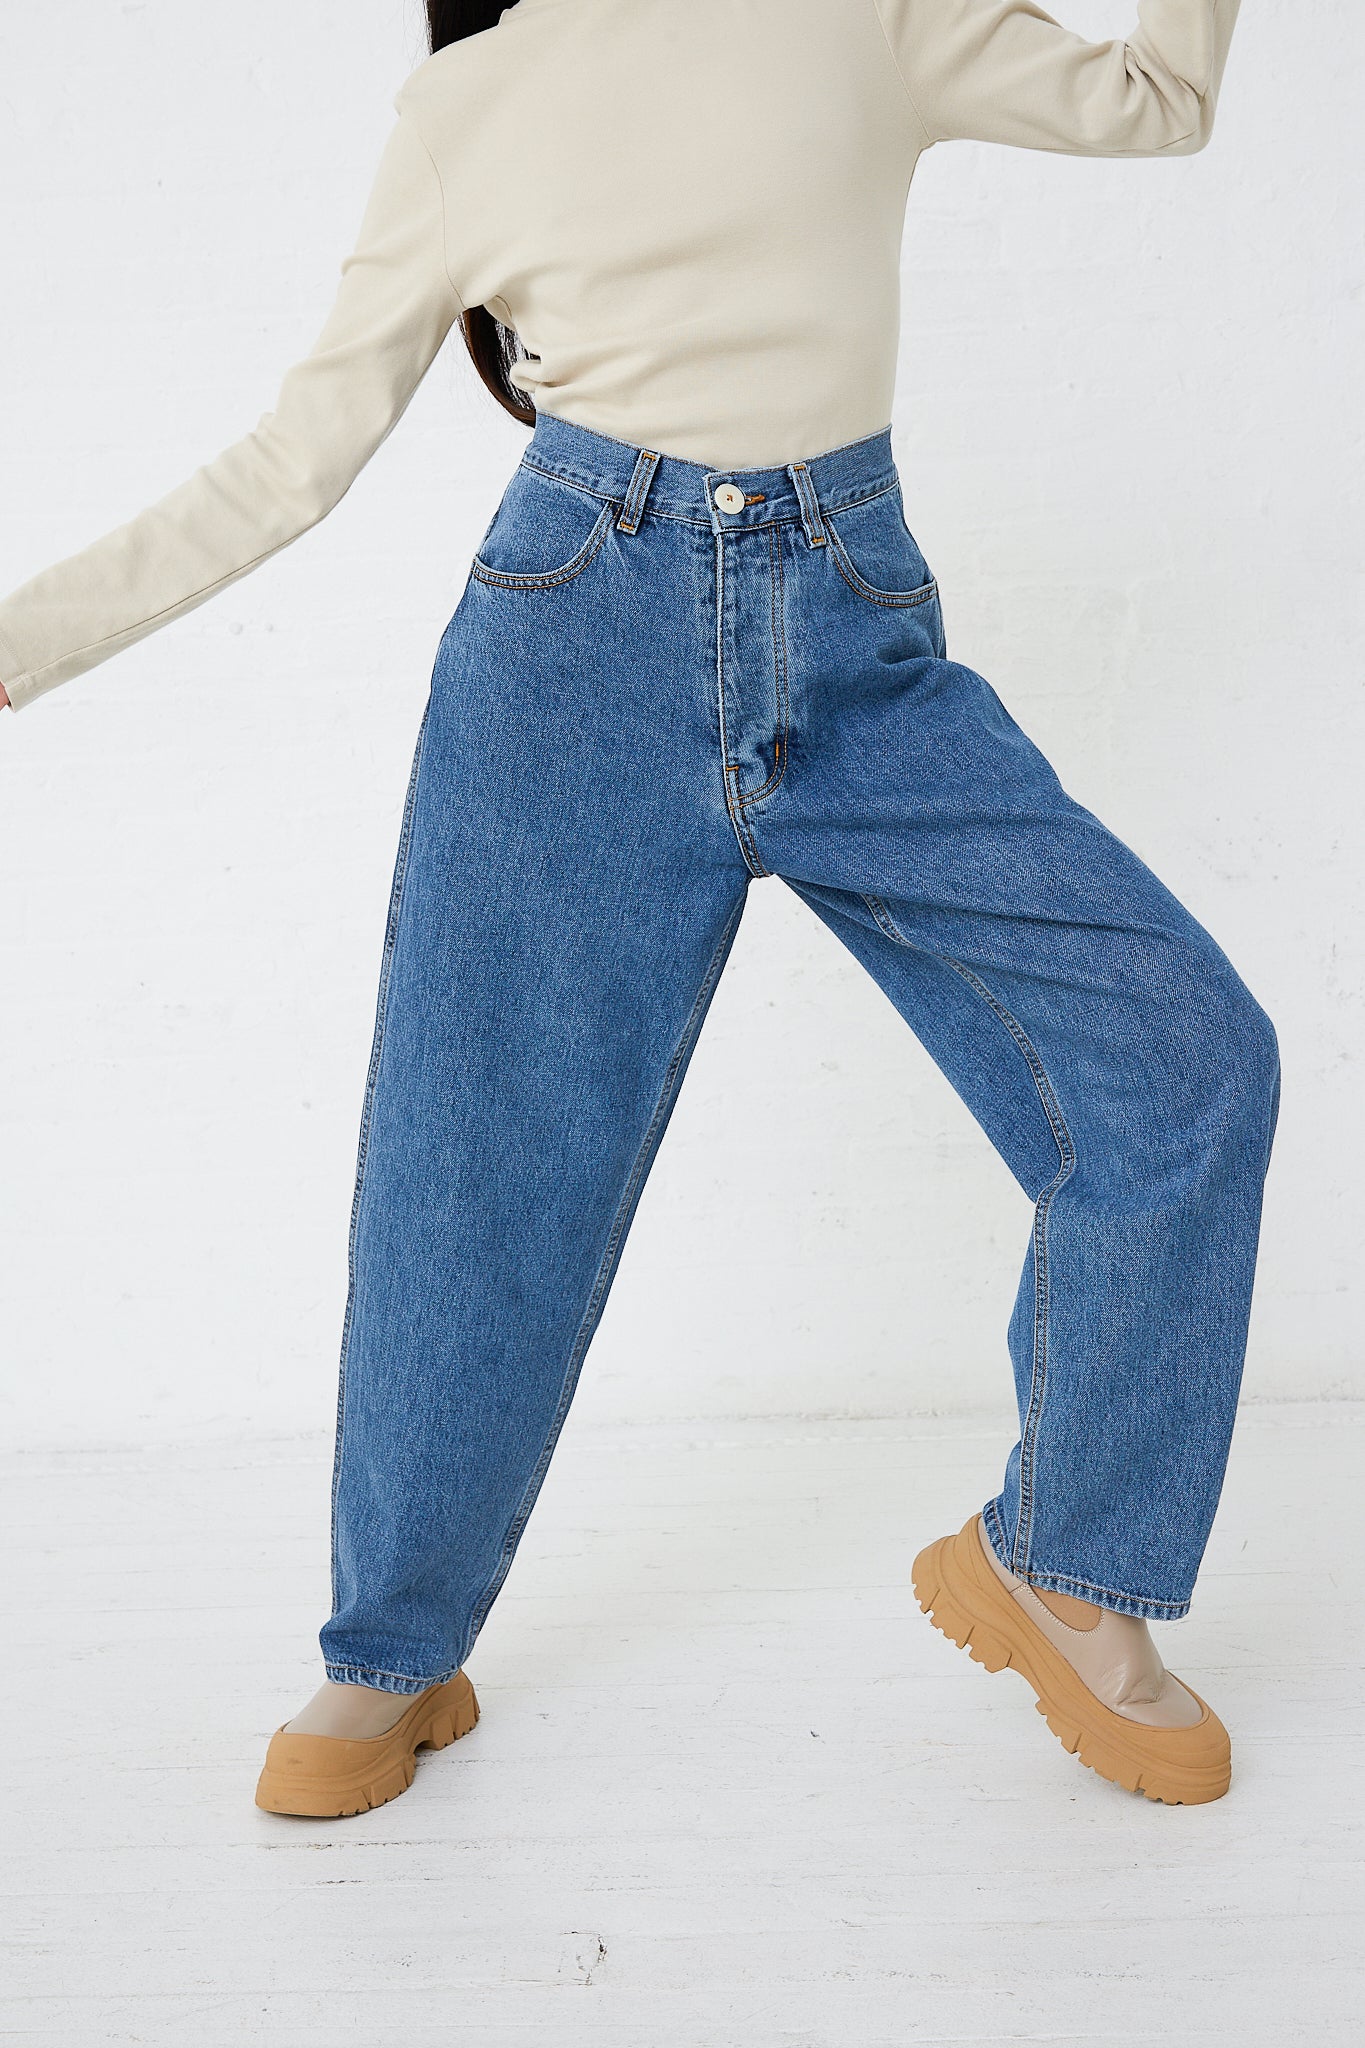 A woman wearing high waisted jeans made from Jesse Kamm's Japanese Denim California Wide in Cowboy Blue and a turtle neck sweater.